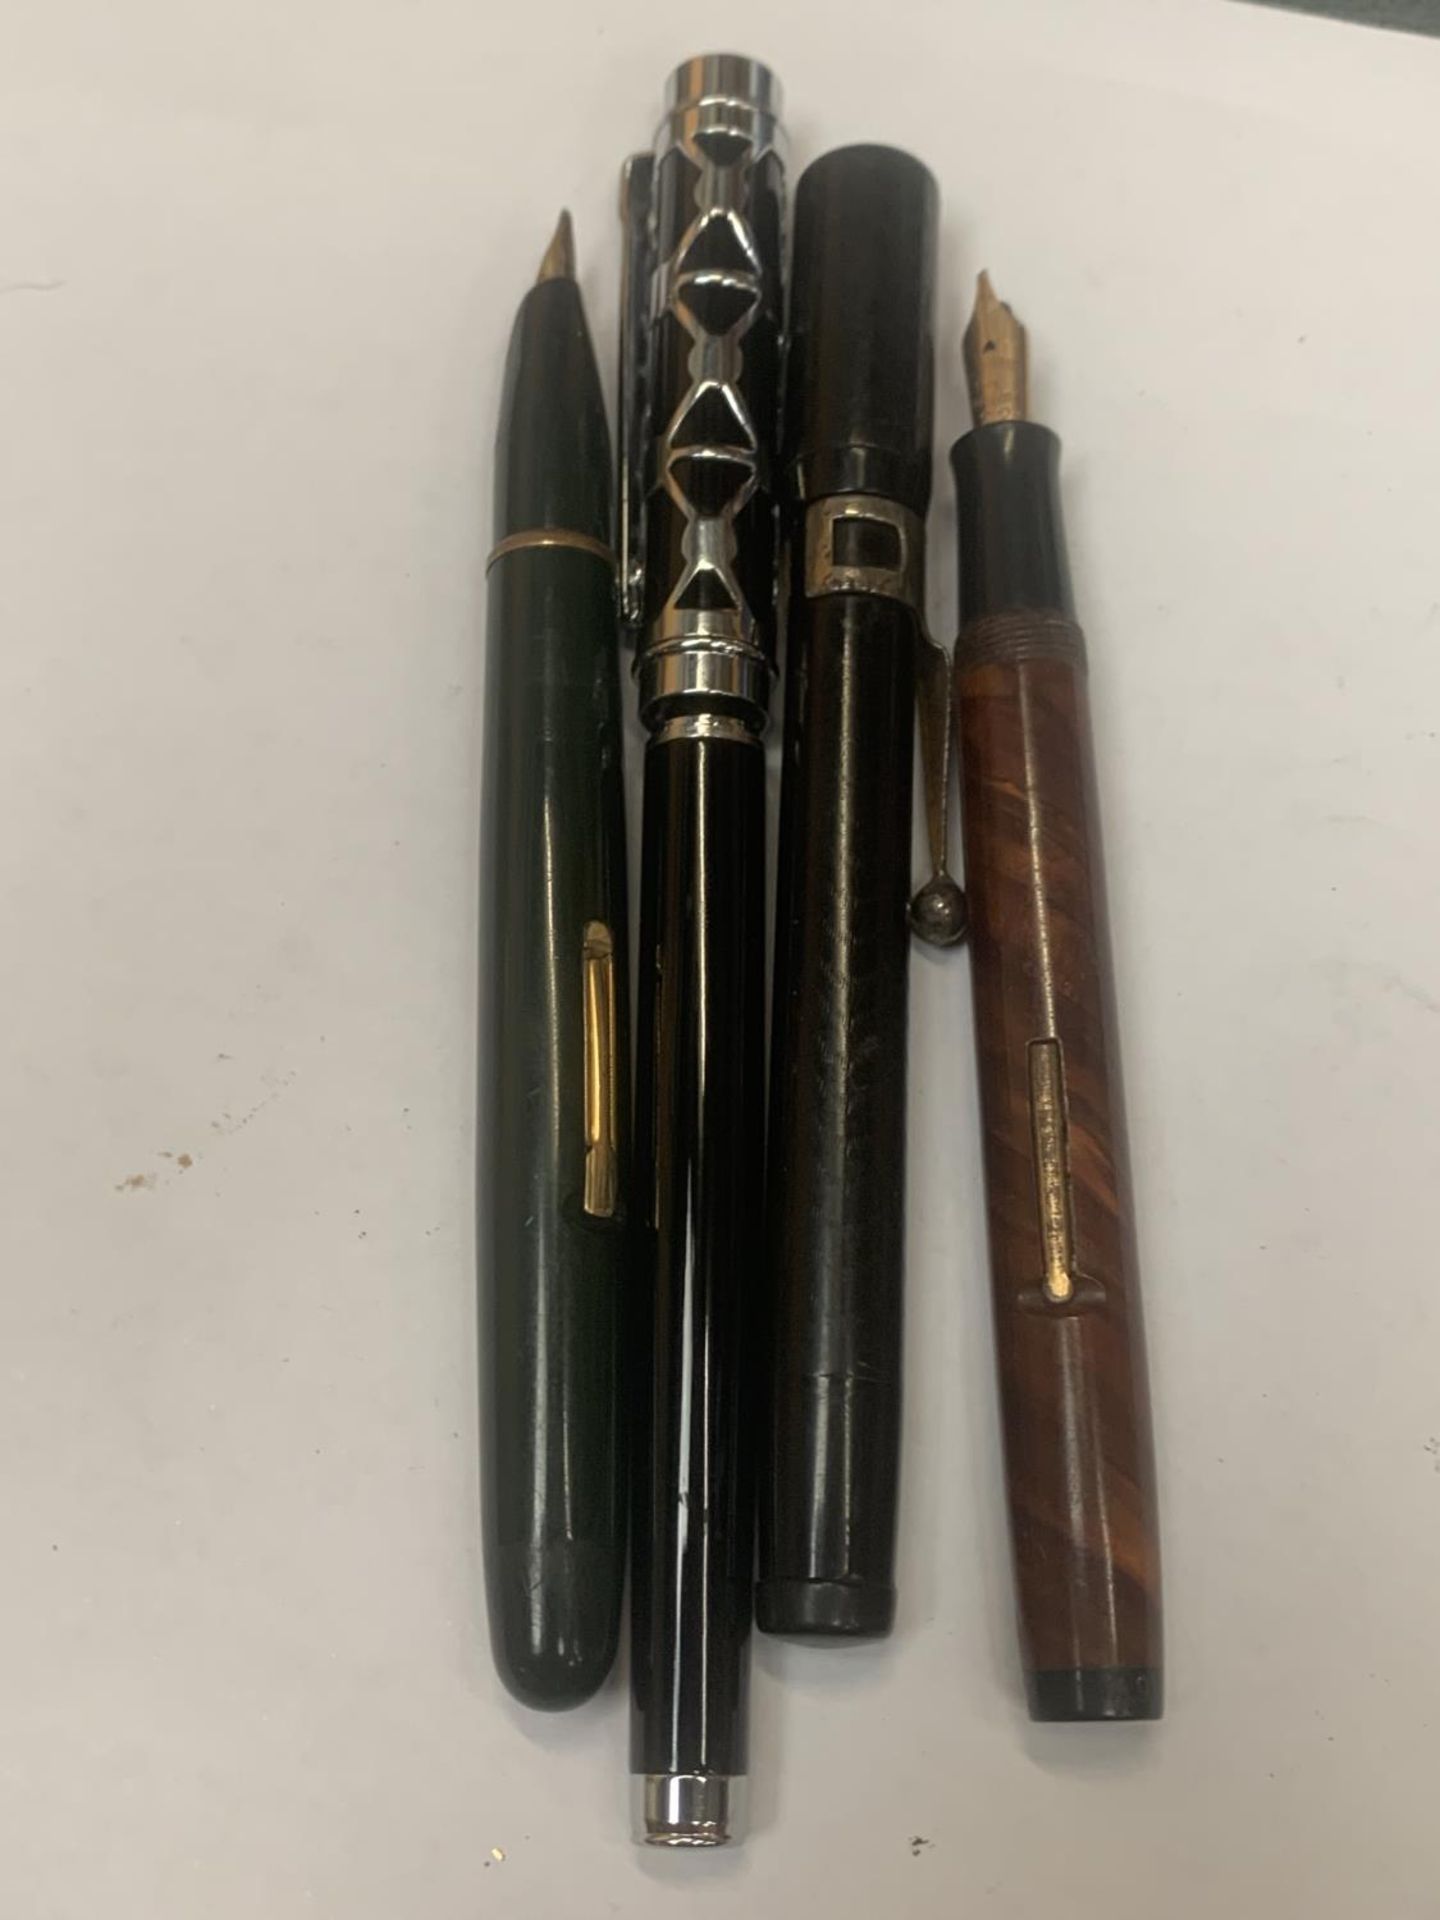 FOUR VARIOUS PENS TO INCLUDE THREE FOUNTAIN PENS AND A BIRO ALL A/F